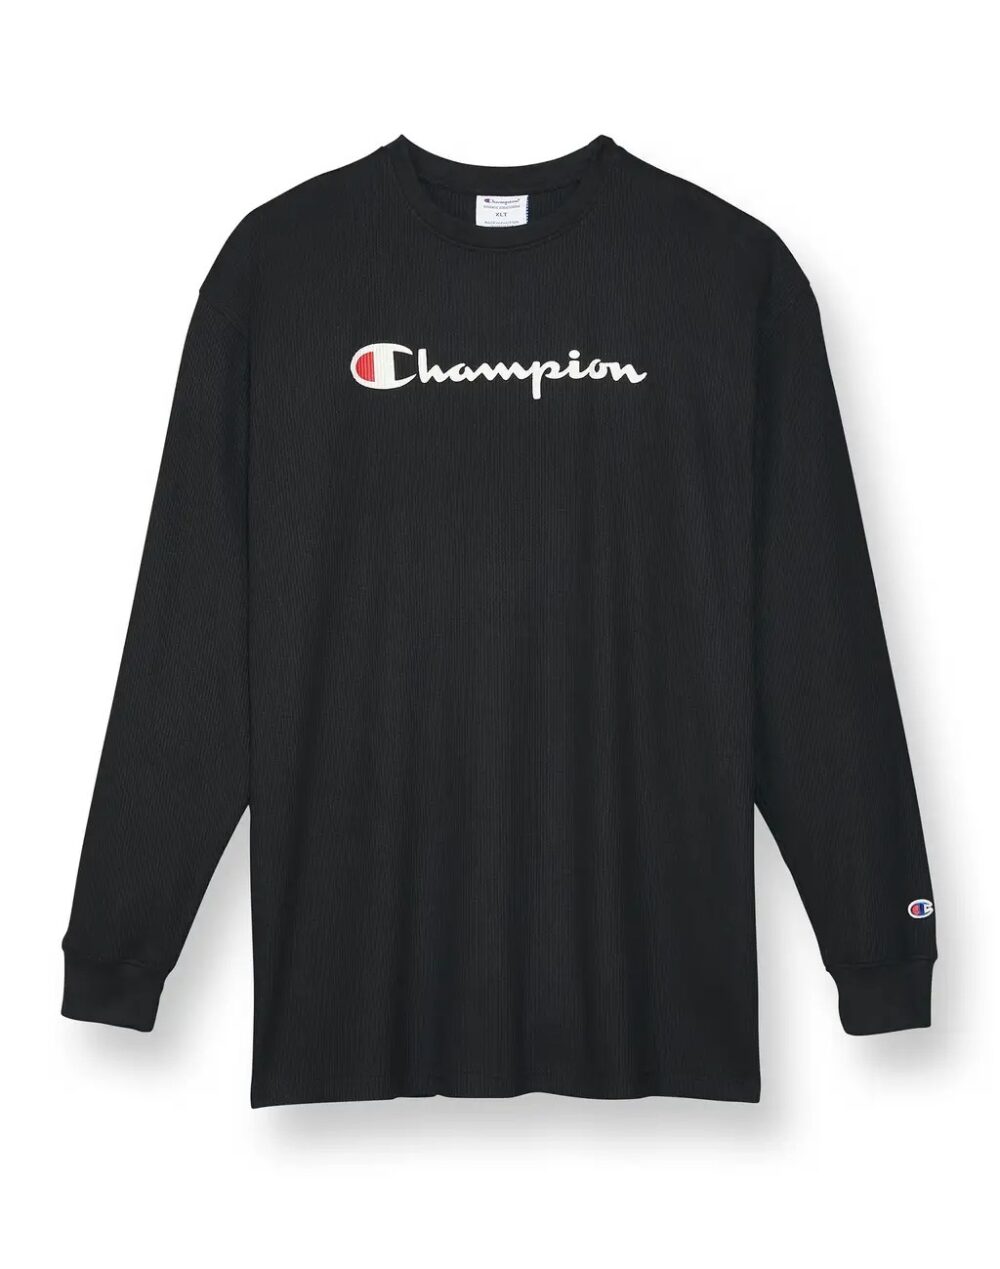 Champion Big Tee, Black crewneck tee with script logo, Designed for big and tall sizes, Comfortable waffle fabric, Available in a range of sizes for all body types, Classic crewneck style for a relaxed fit, Perfect for casual or athletic wear